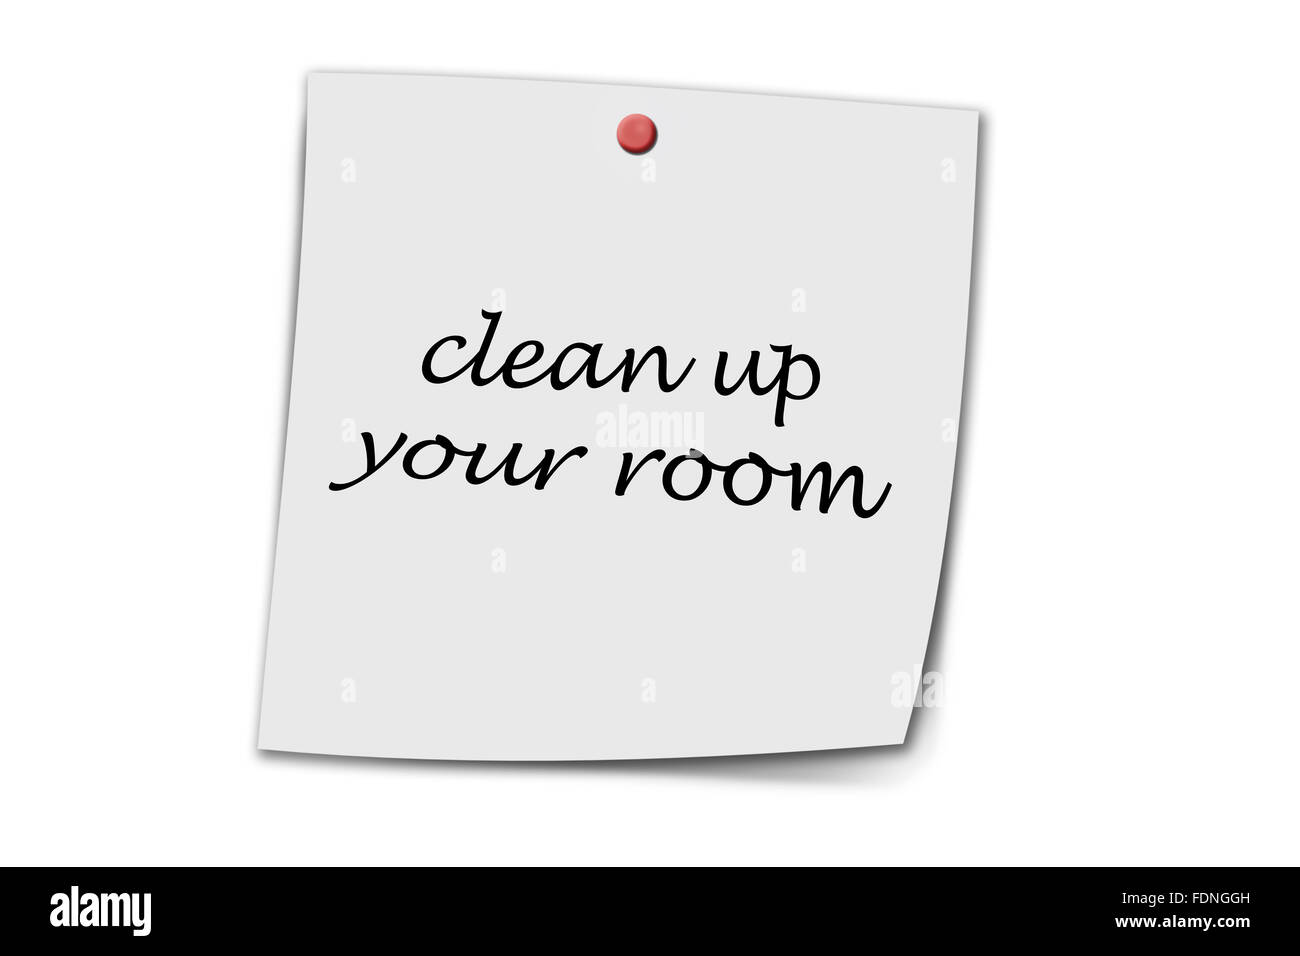 clean up your room written on a memo isolated on white background Stock Photo